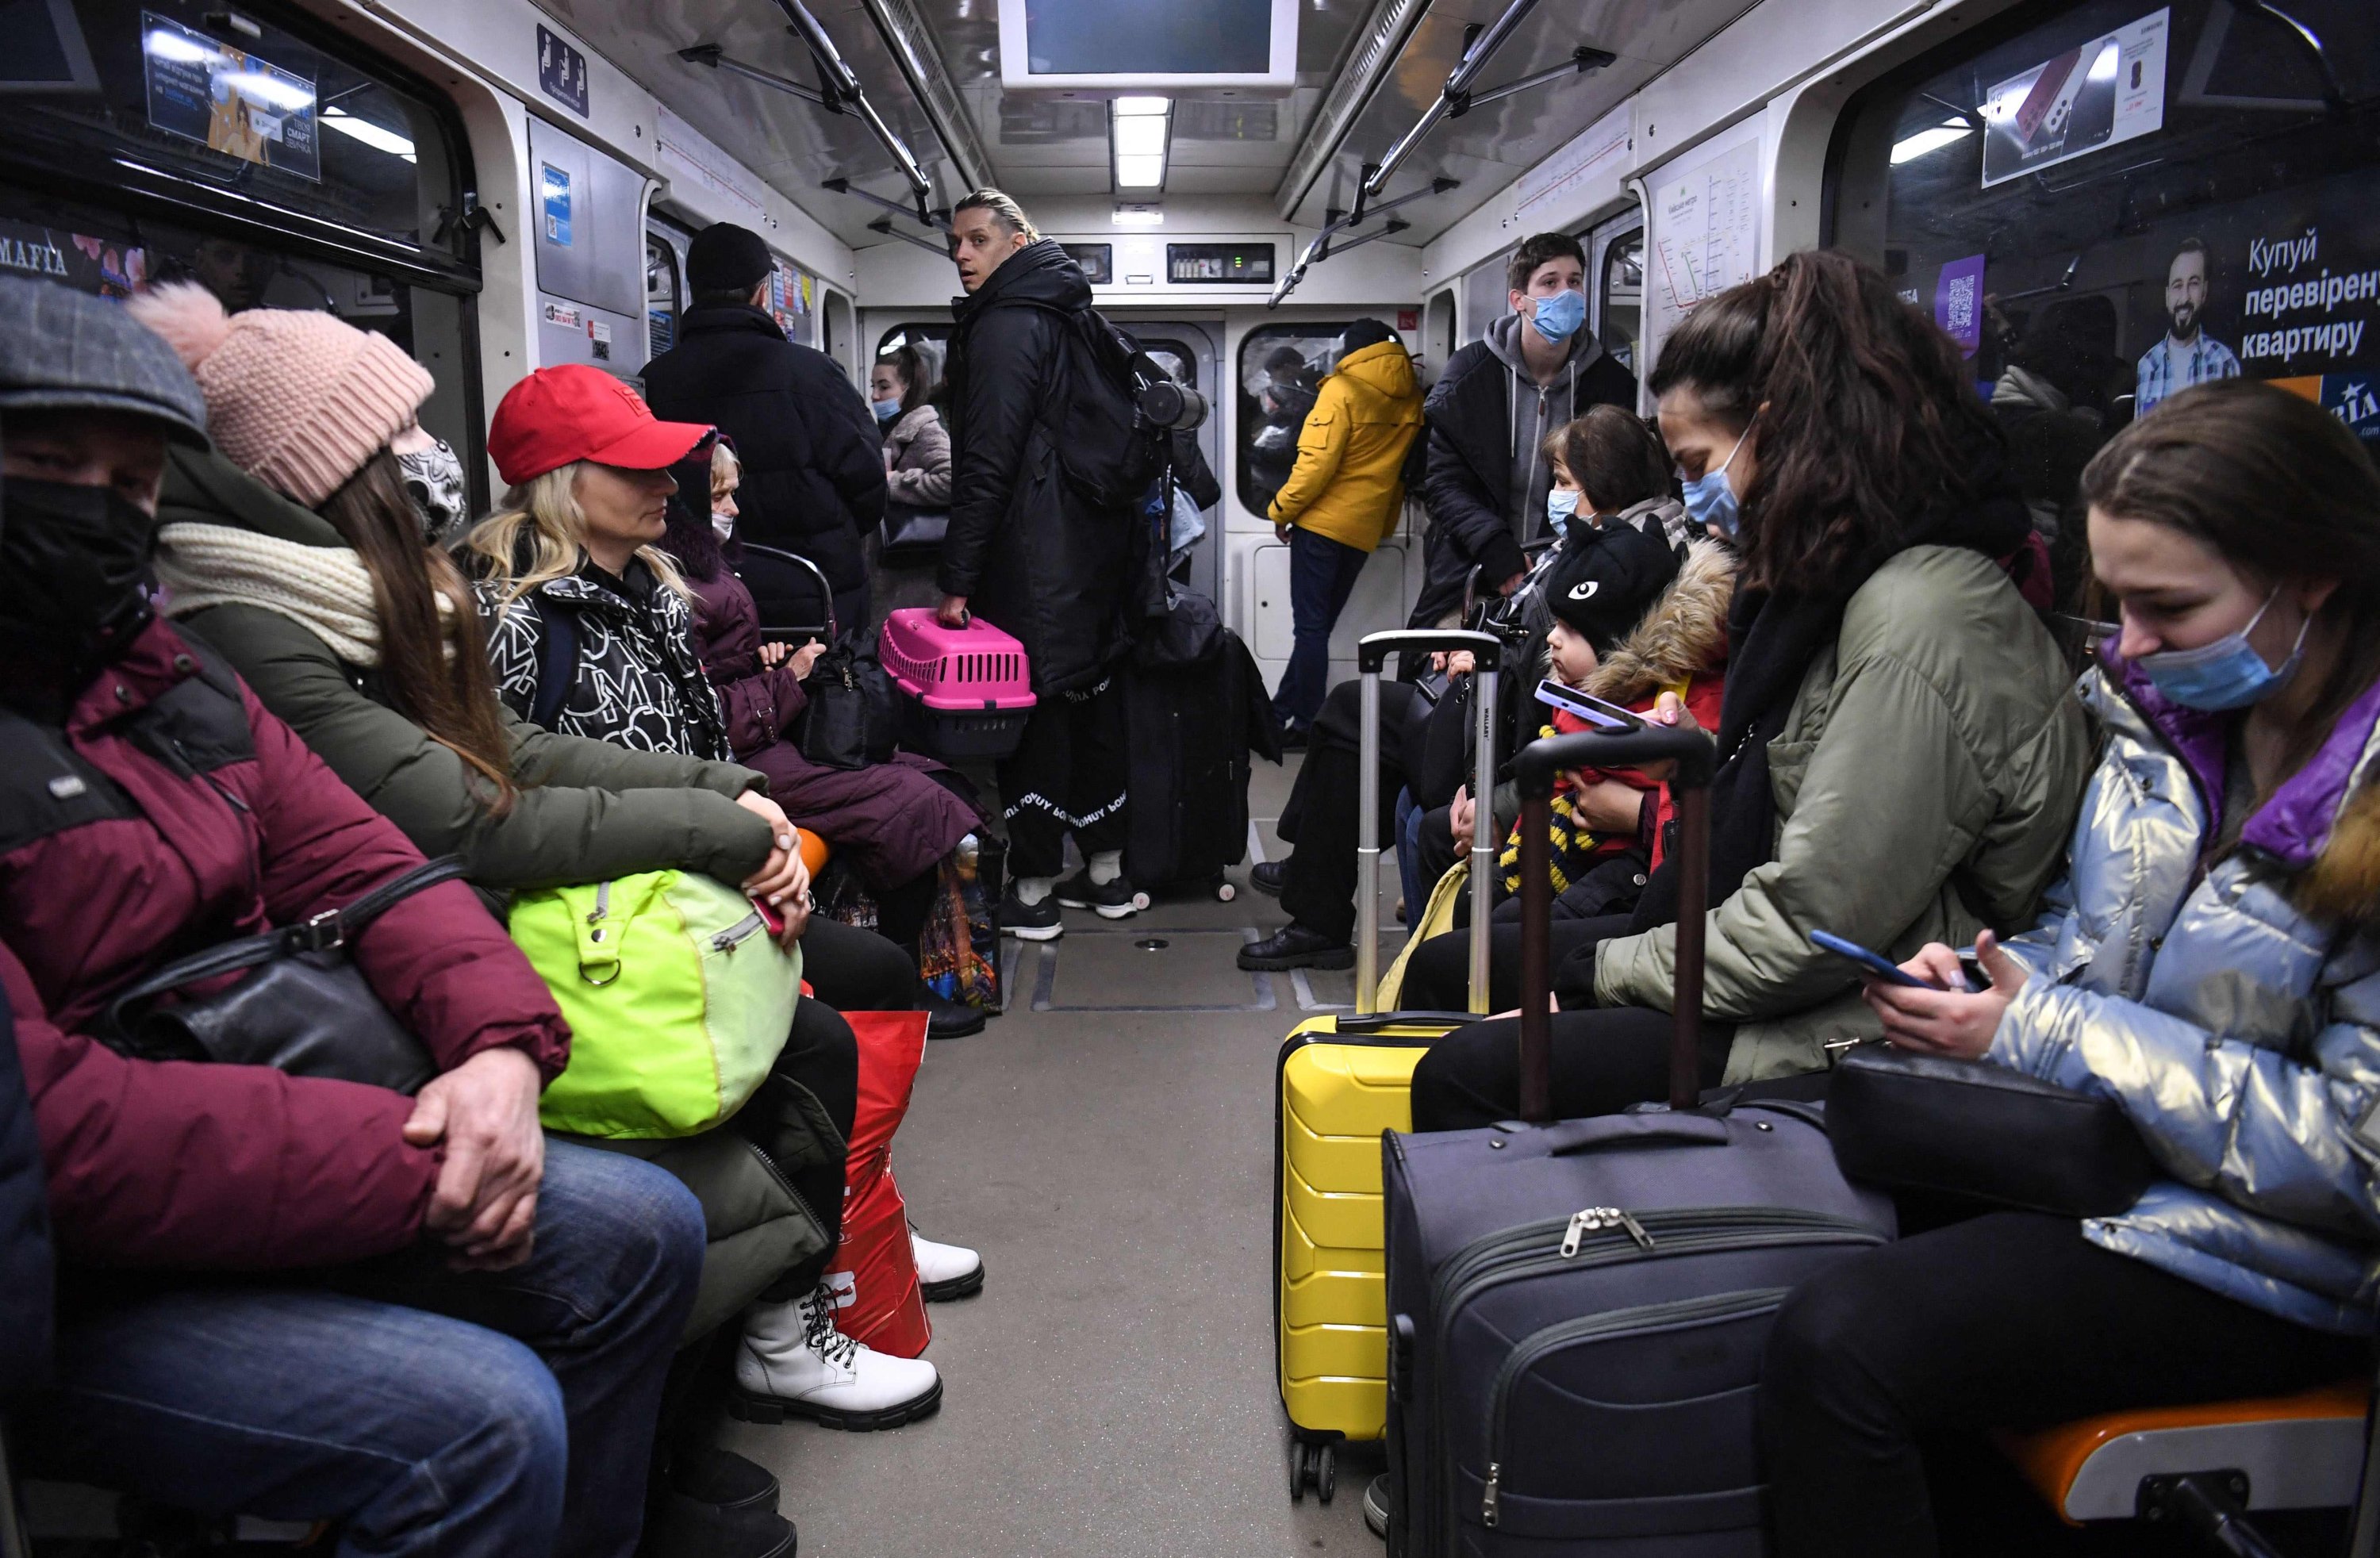 People, some carrying bags and suitcases, sit in a metro in Kyiv, Ukraine, on the morning of Feb. 24, 2022. (AFP Photo)